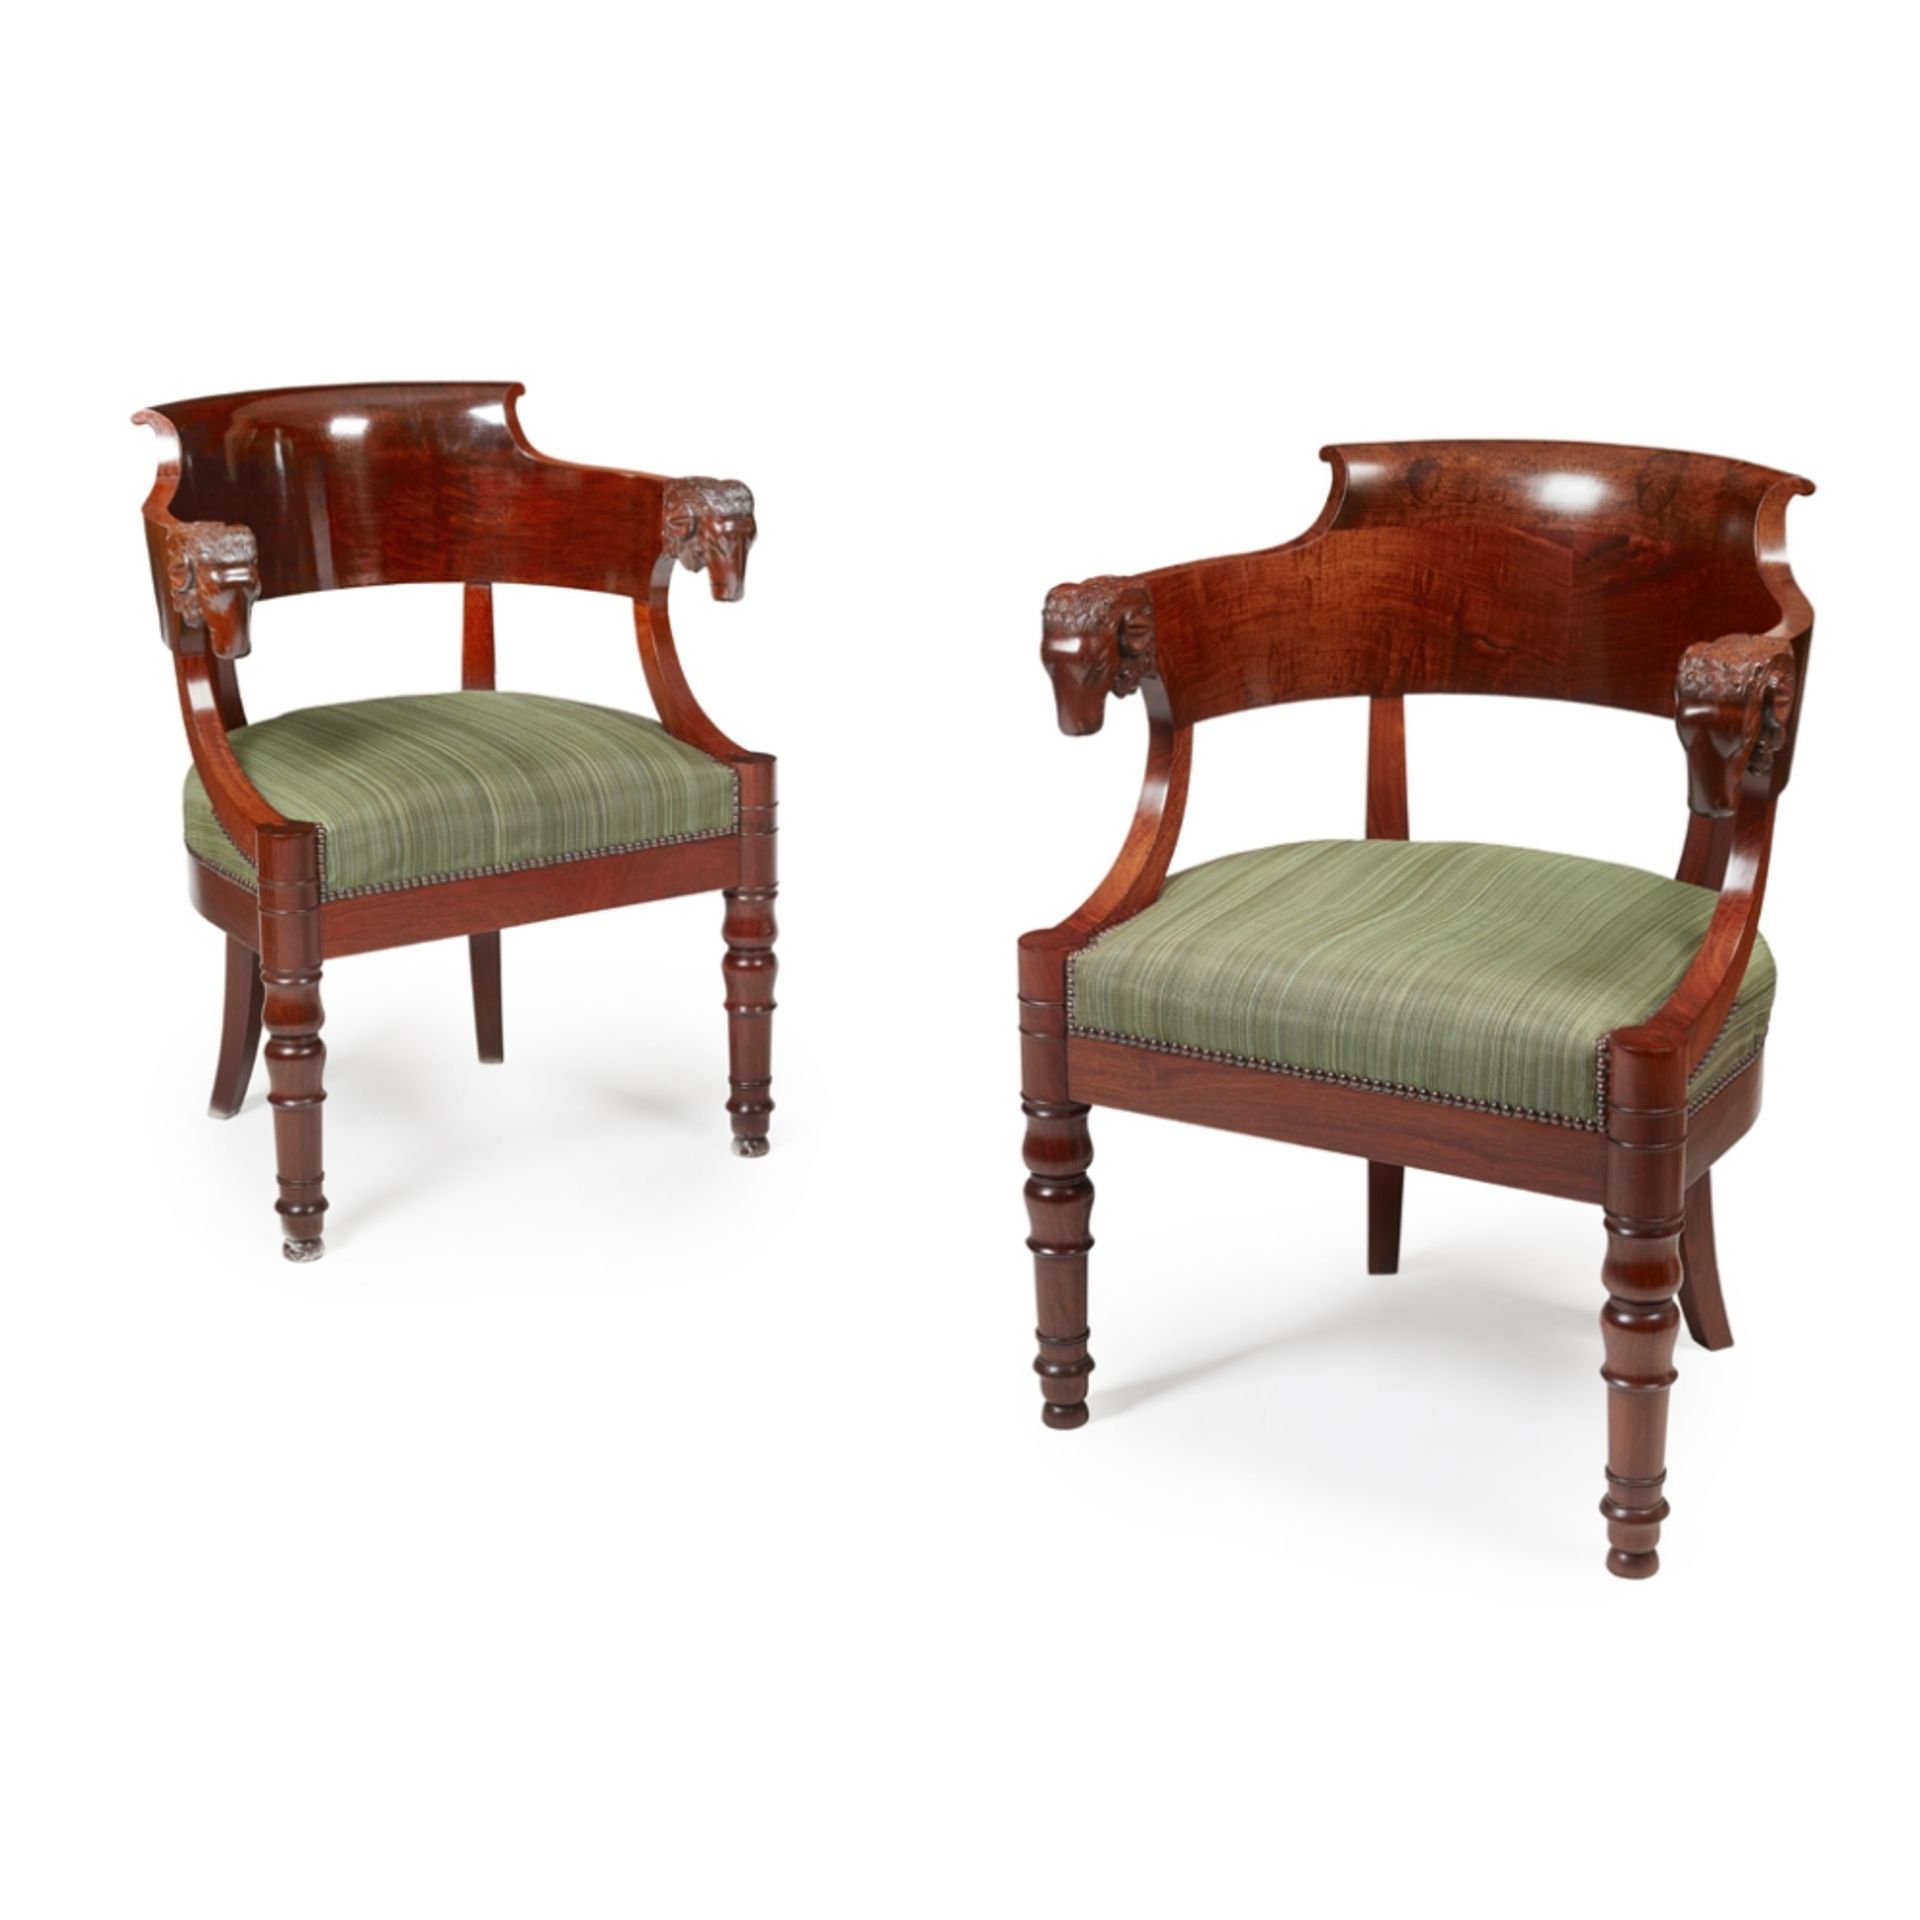 PAIR OF EMPIRE STYLE MAHOGANY OPEN ARMCHAIRS 20TH CENTURY the shaped backs terminating in carved